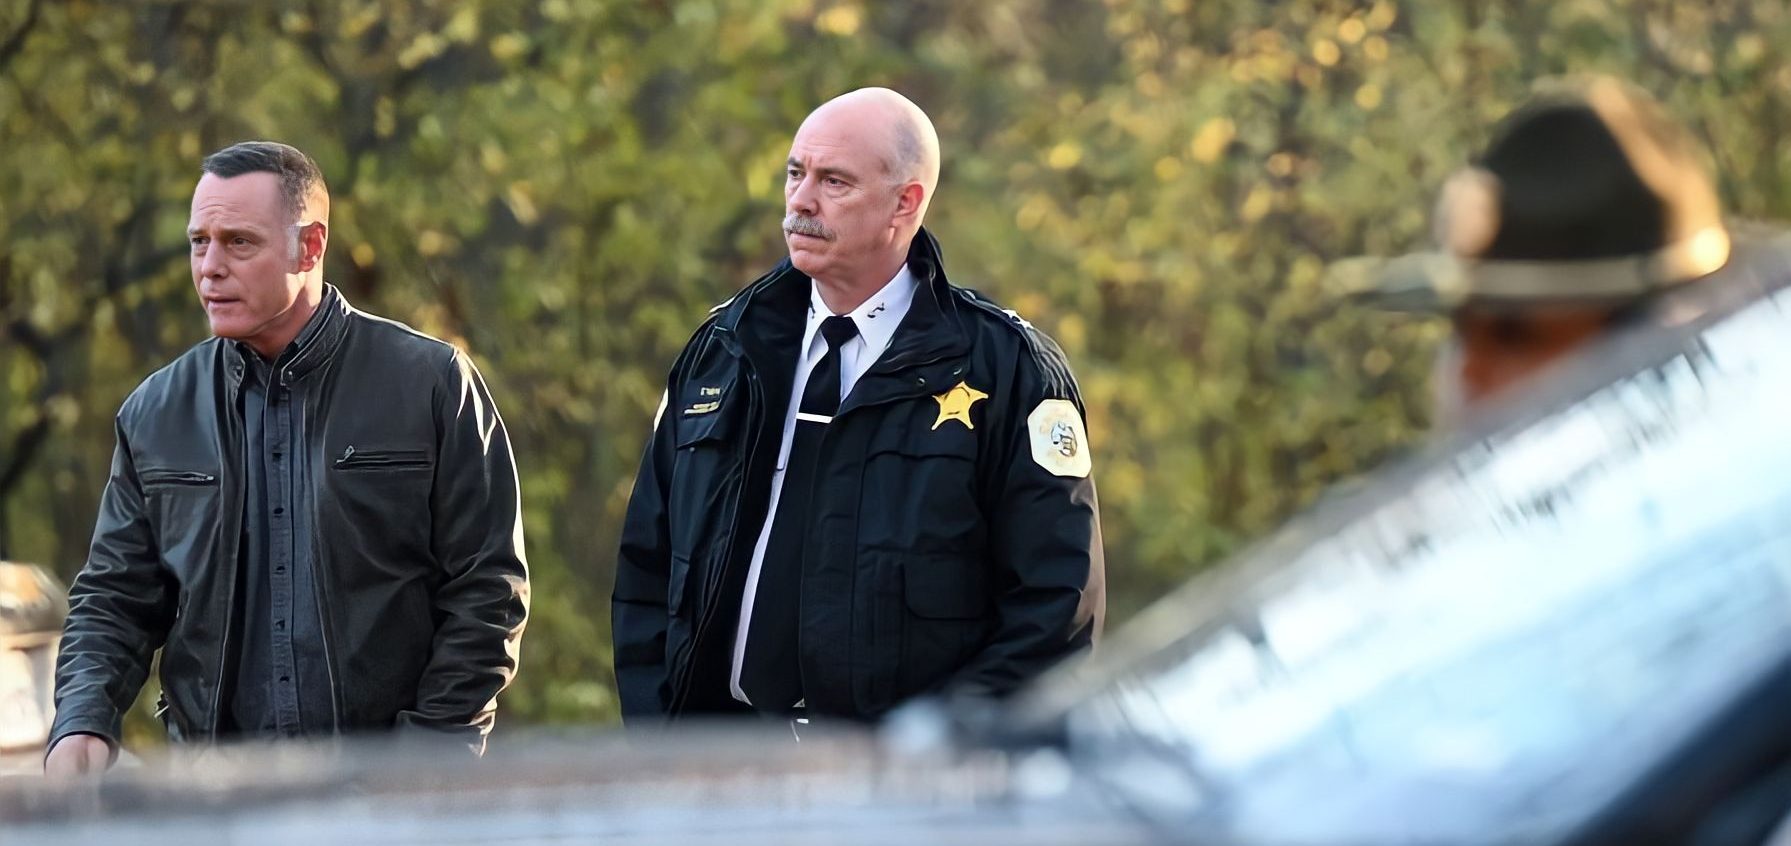 Is Chief Patrick O’Neal Dead? Did Michael Gaston Leave Chicago PD?